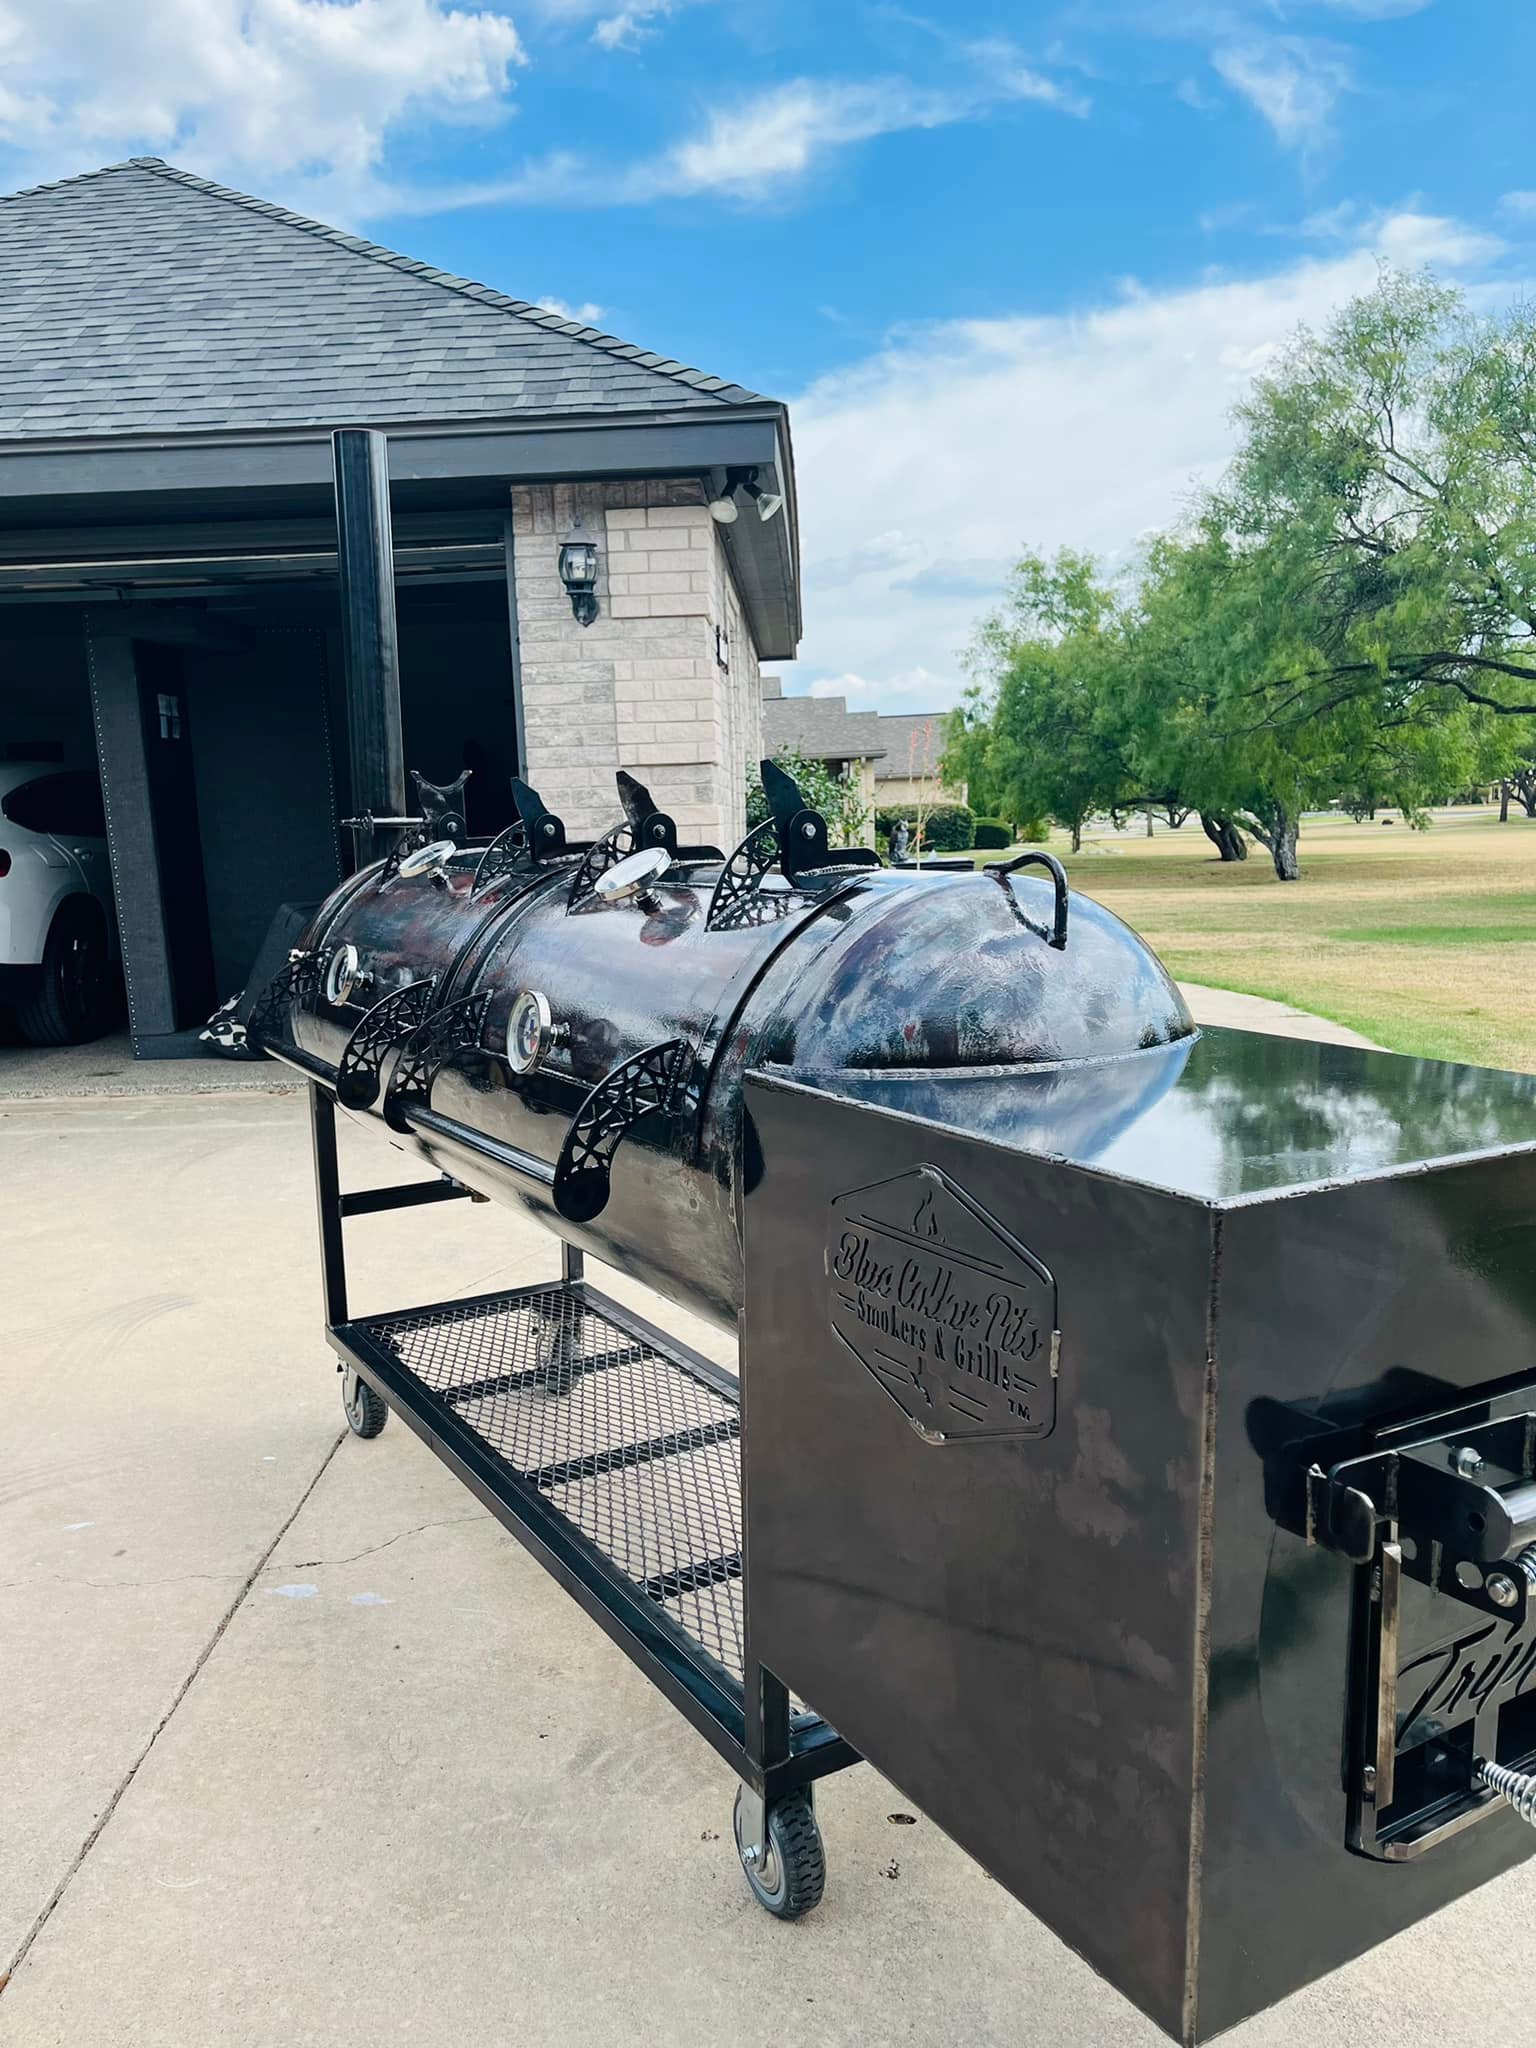 https://bluecollarproducts.com/wp-content/uploads/2022/01/Blue-Collar-Pits-Smokers-and-Grills-150-Qaway-closed-62122.jpg